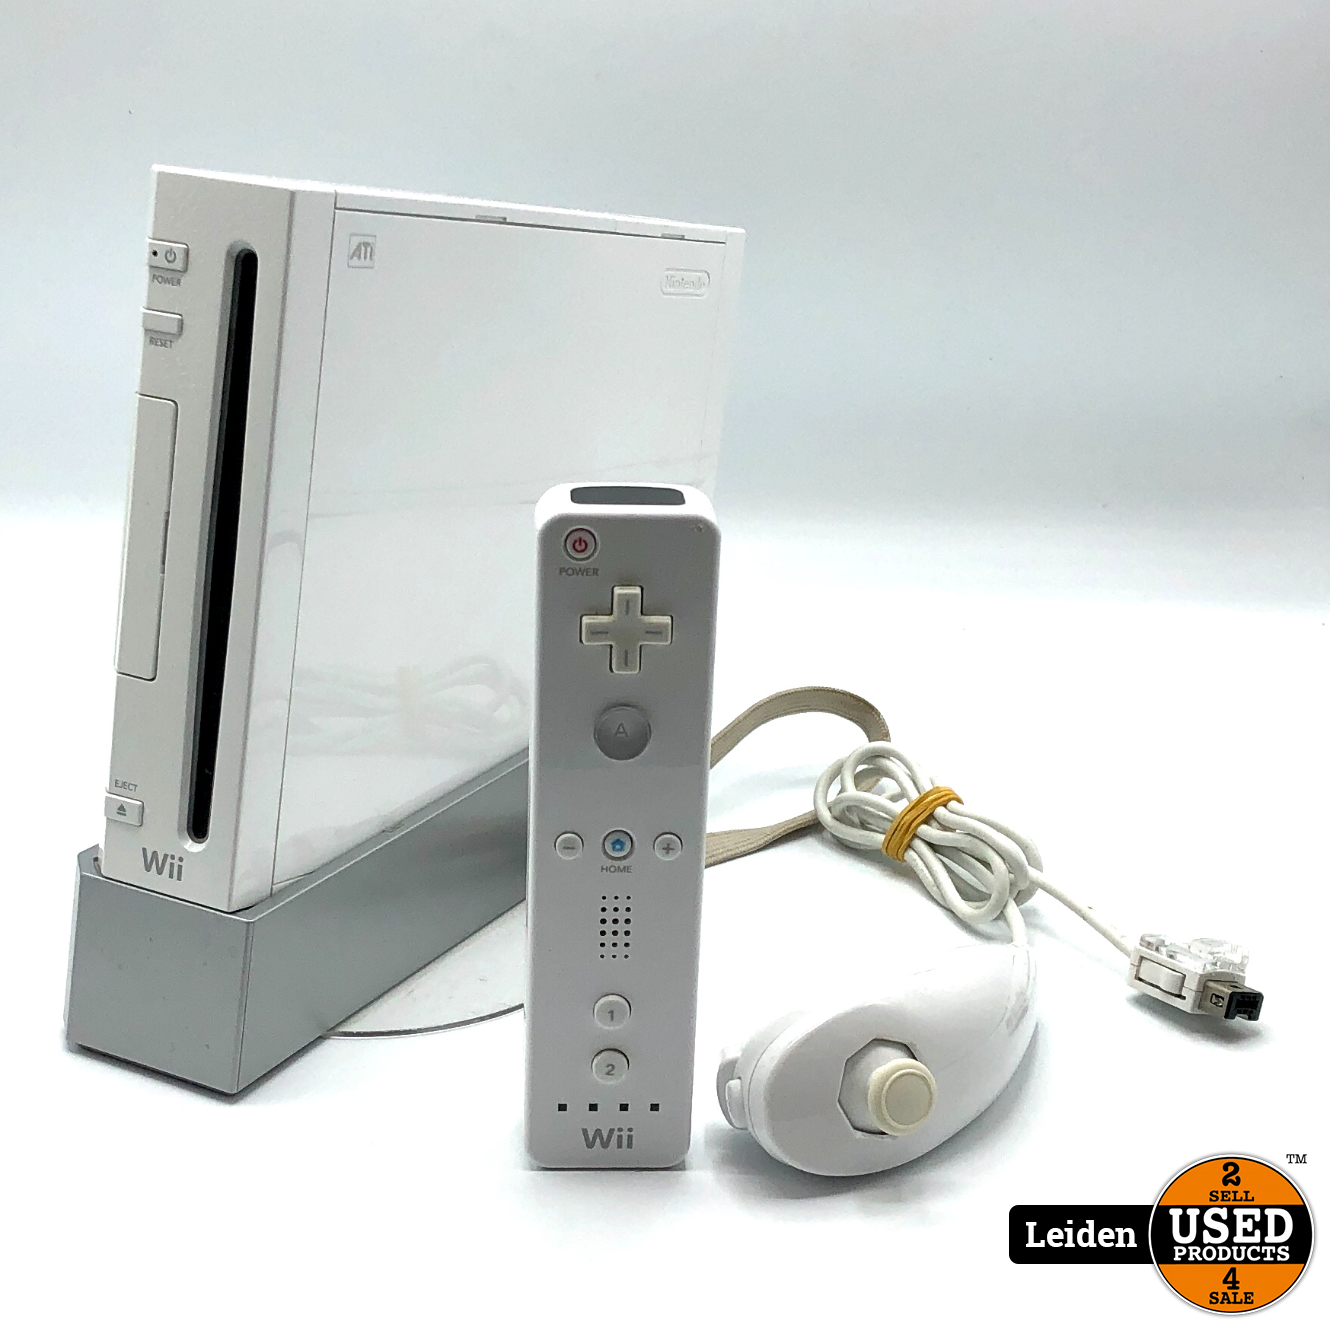 Nintendo Wii Wit - Used Products Leiden